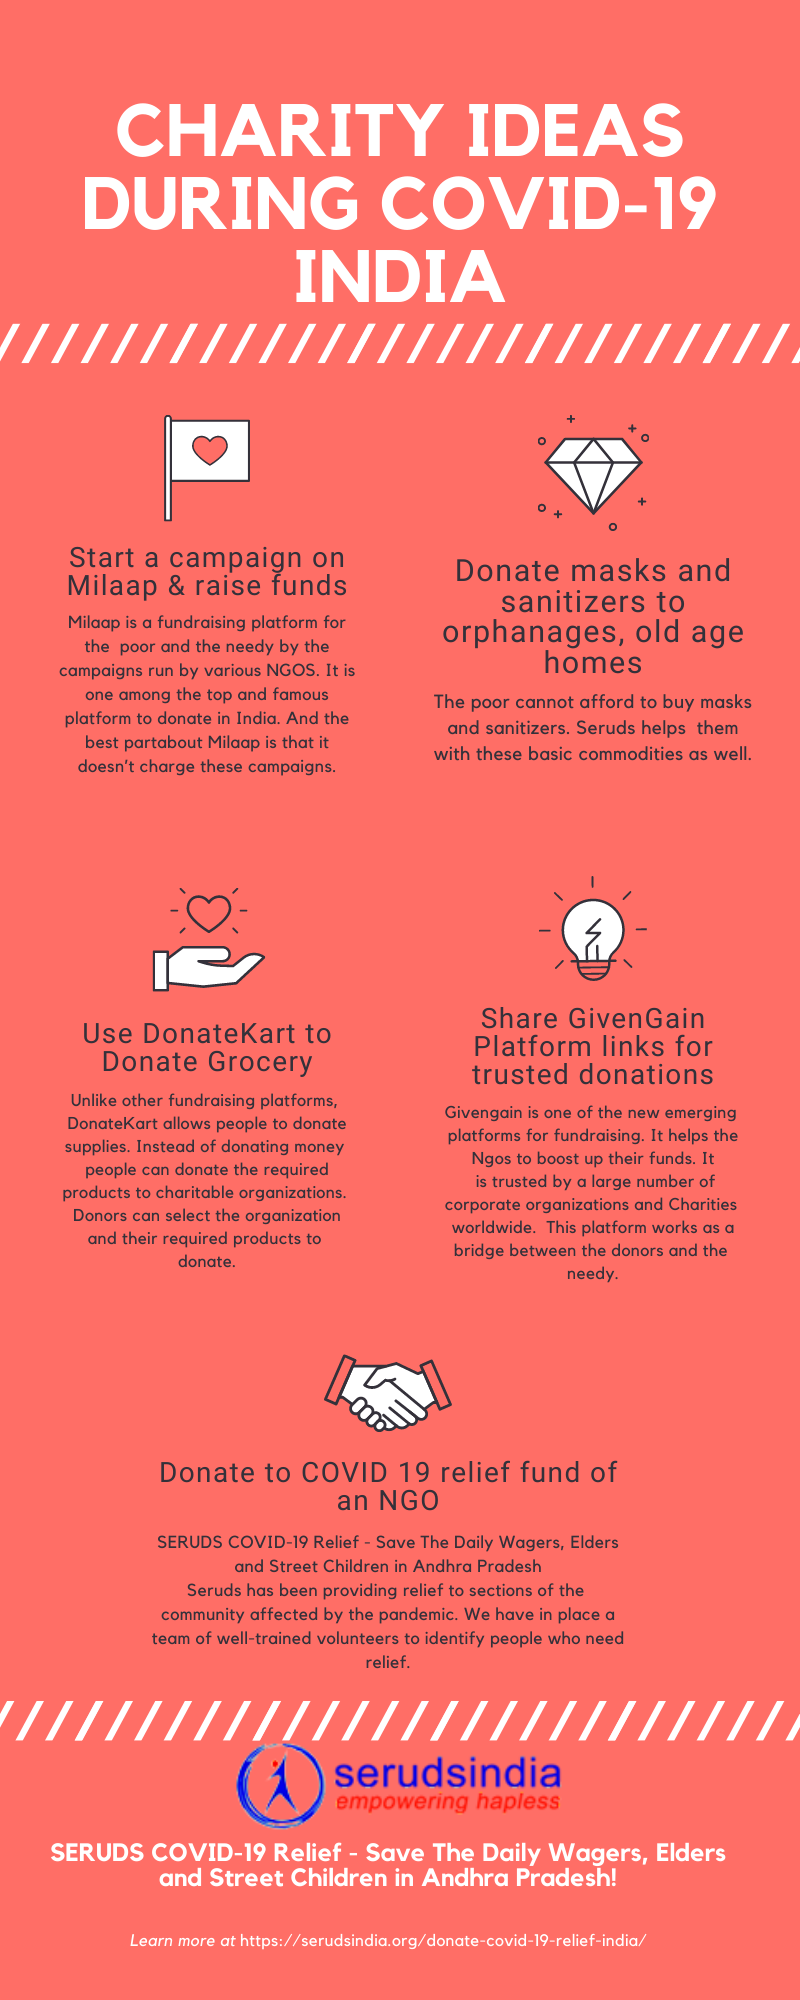 Seruds Charity Ideas During COVID-19 Infographic